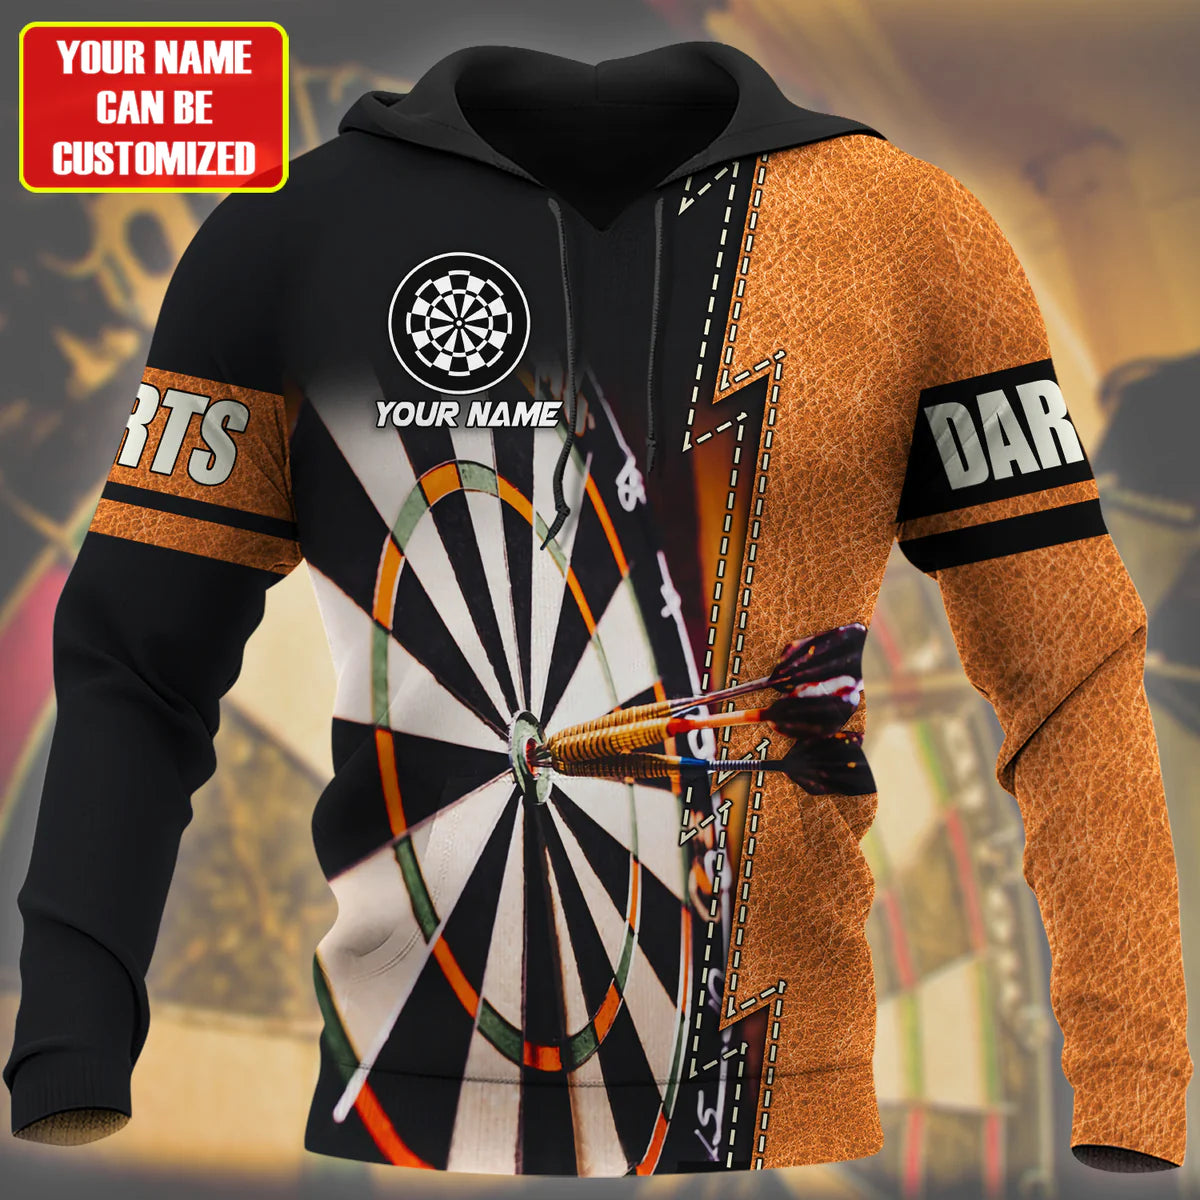 Darts Hoodie for Men with 3D All-Over Print and Personalized Name, Customized Darts Shirt – DHD001